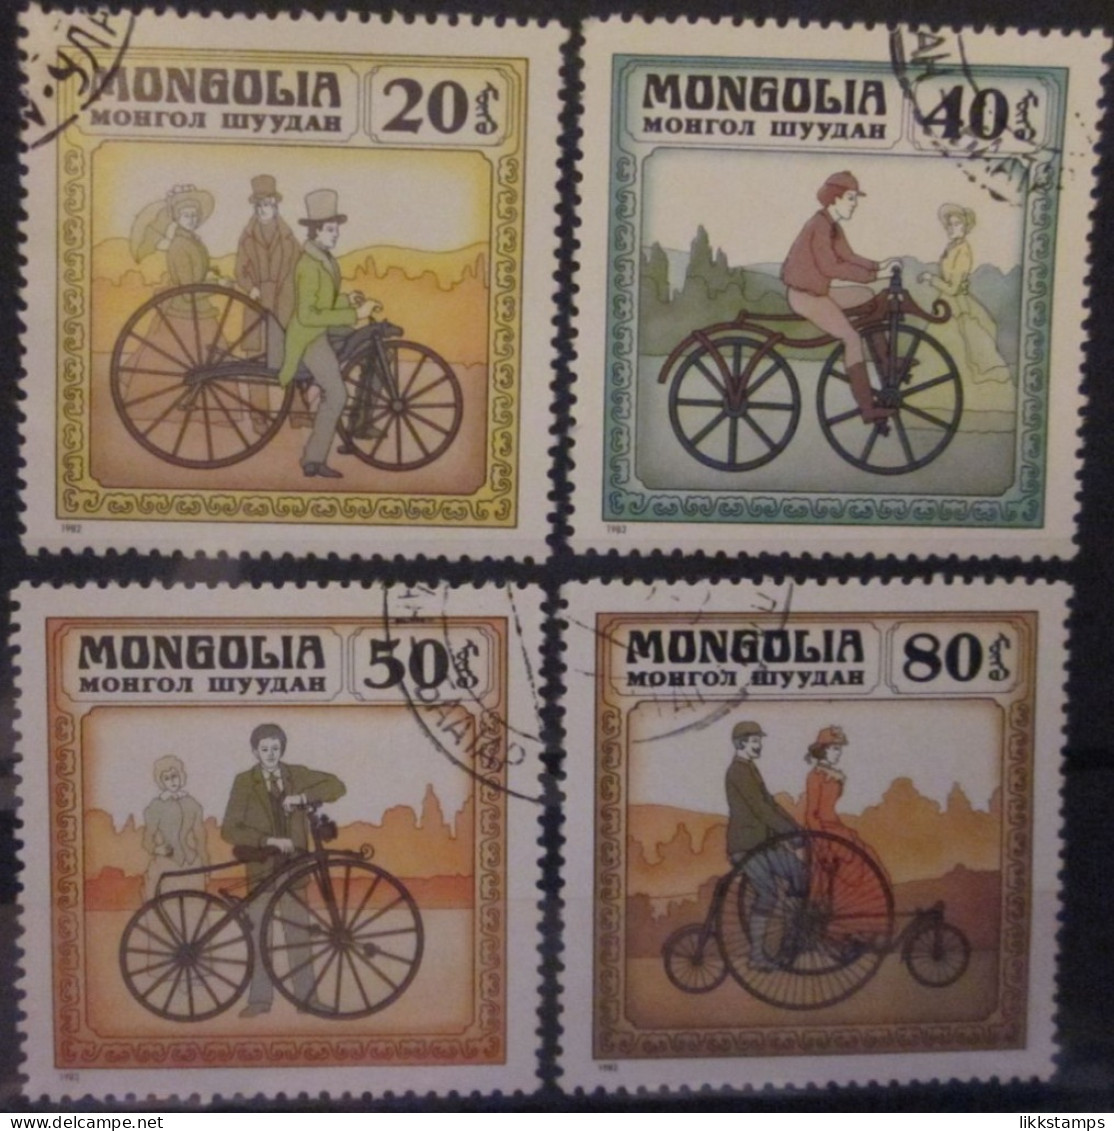 MONGOLIA ~ 1982 ~ S.G. NUMBERS 1432 - 1433 + 1435, ~ BICYCLES. ~ VFU #03480 - Mongolie